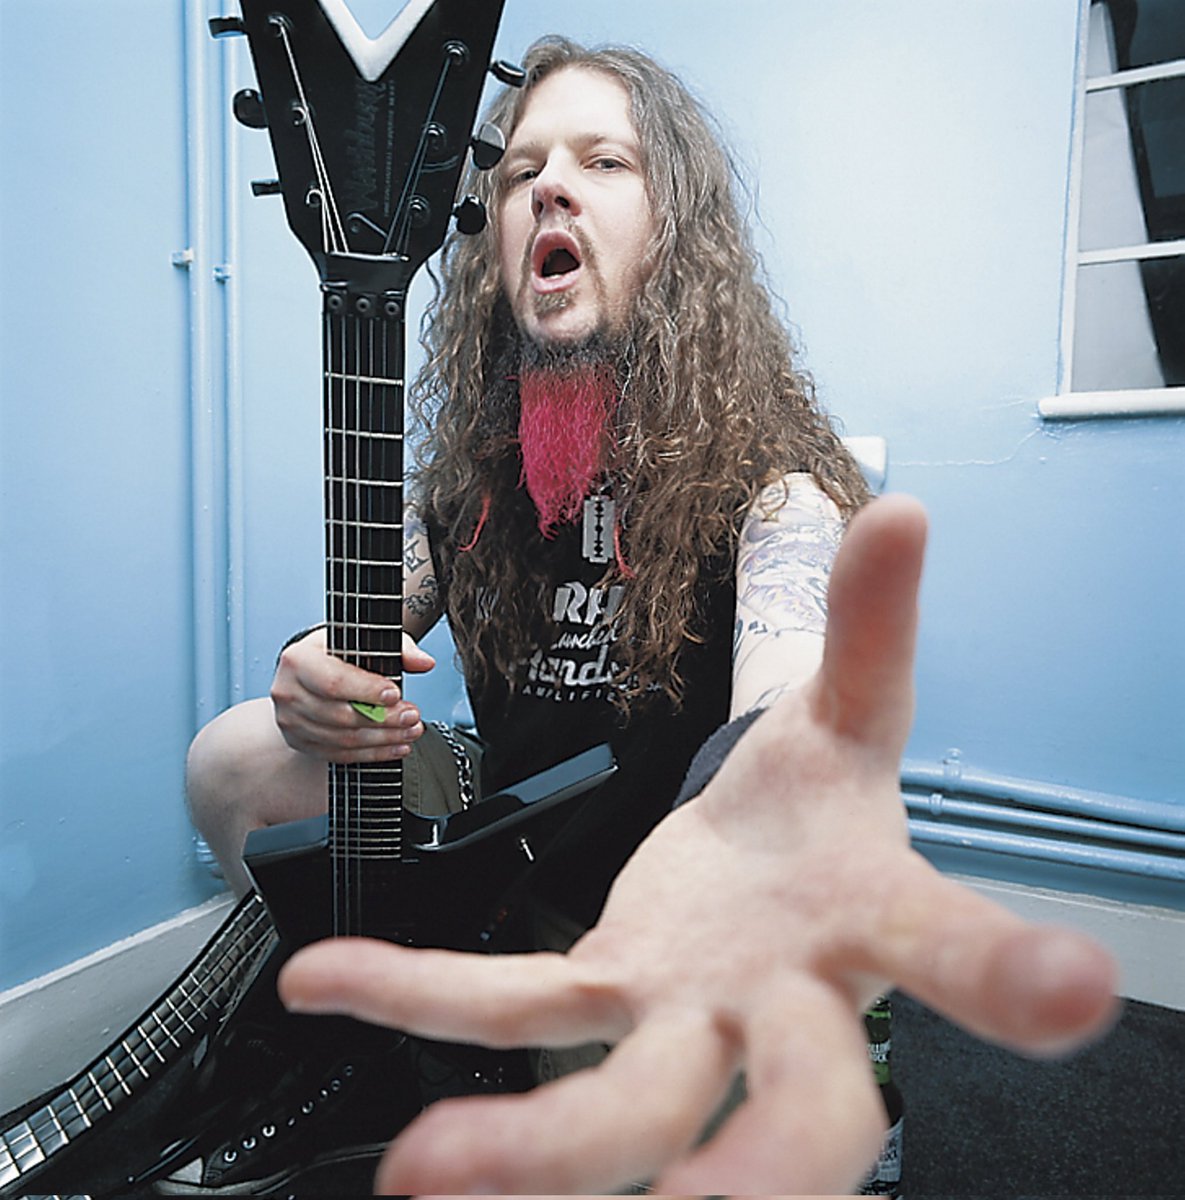 American musician #DimebagDarrell was shot and killed while performing onstage #onthisday in 2004. 🎸 #Pantera #Damageplan #groovemetal #heavymetal #guitar #music #history